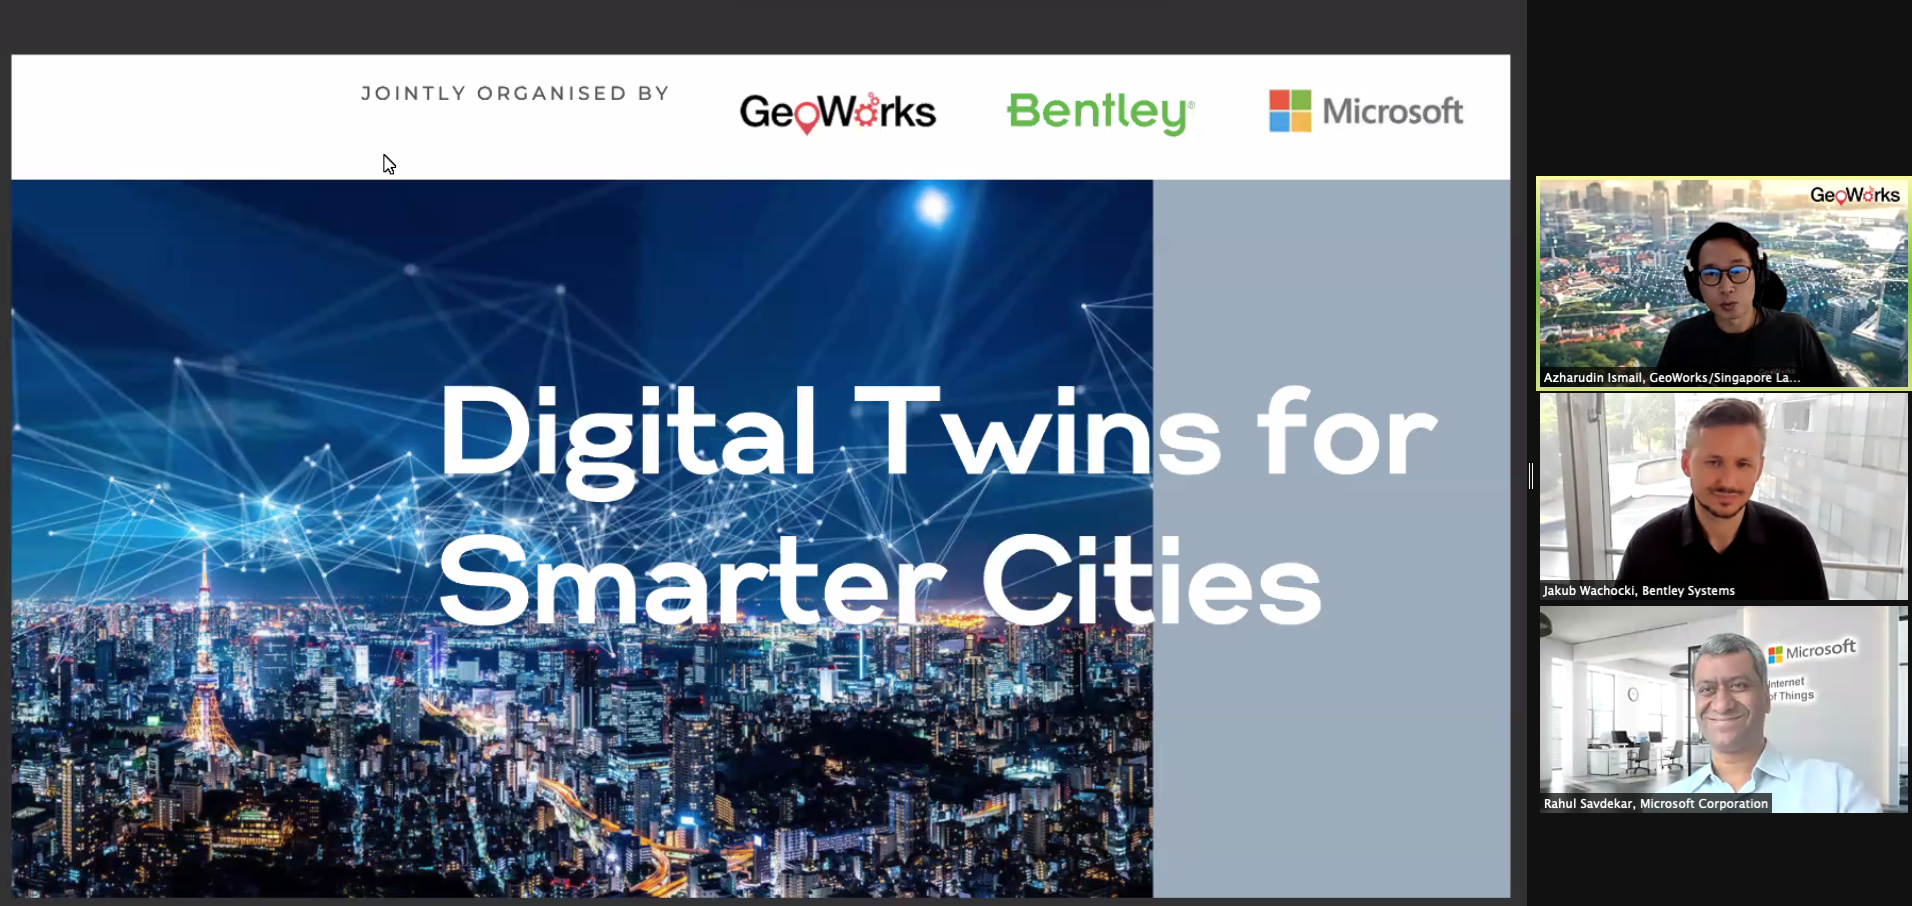 Digital Twins for Smarter Cities